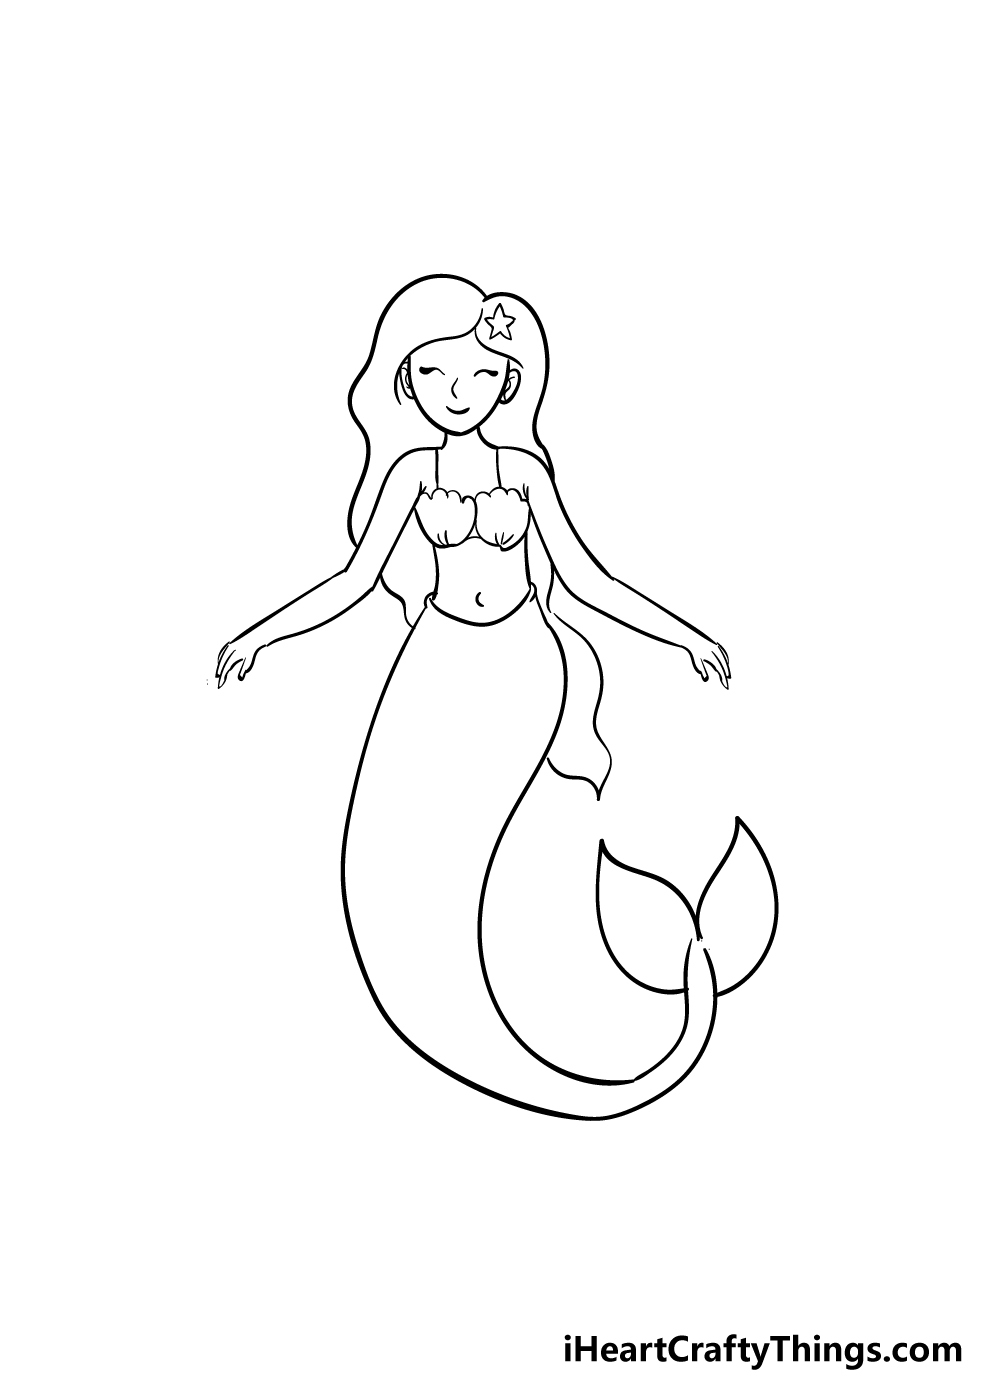 Mermaid Drawing   How To Draw A Mermaid Step By Step